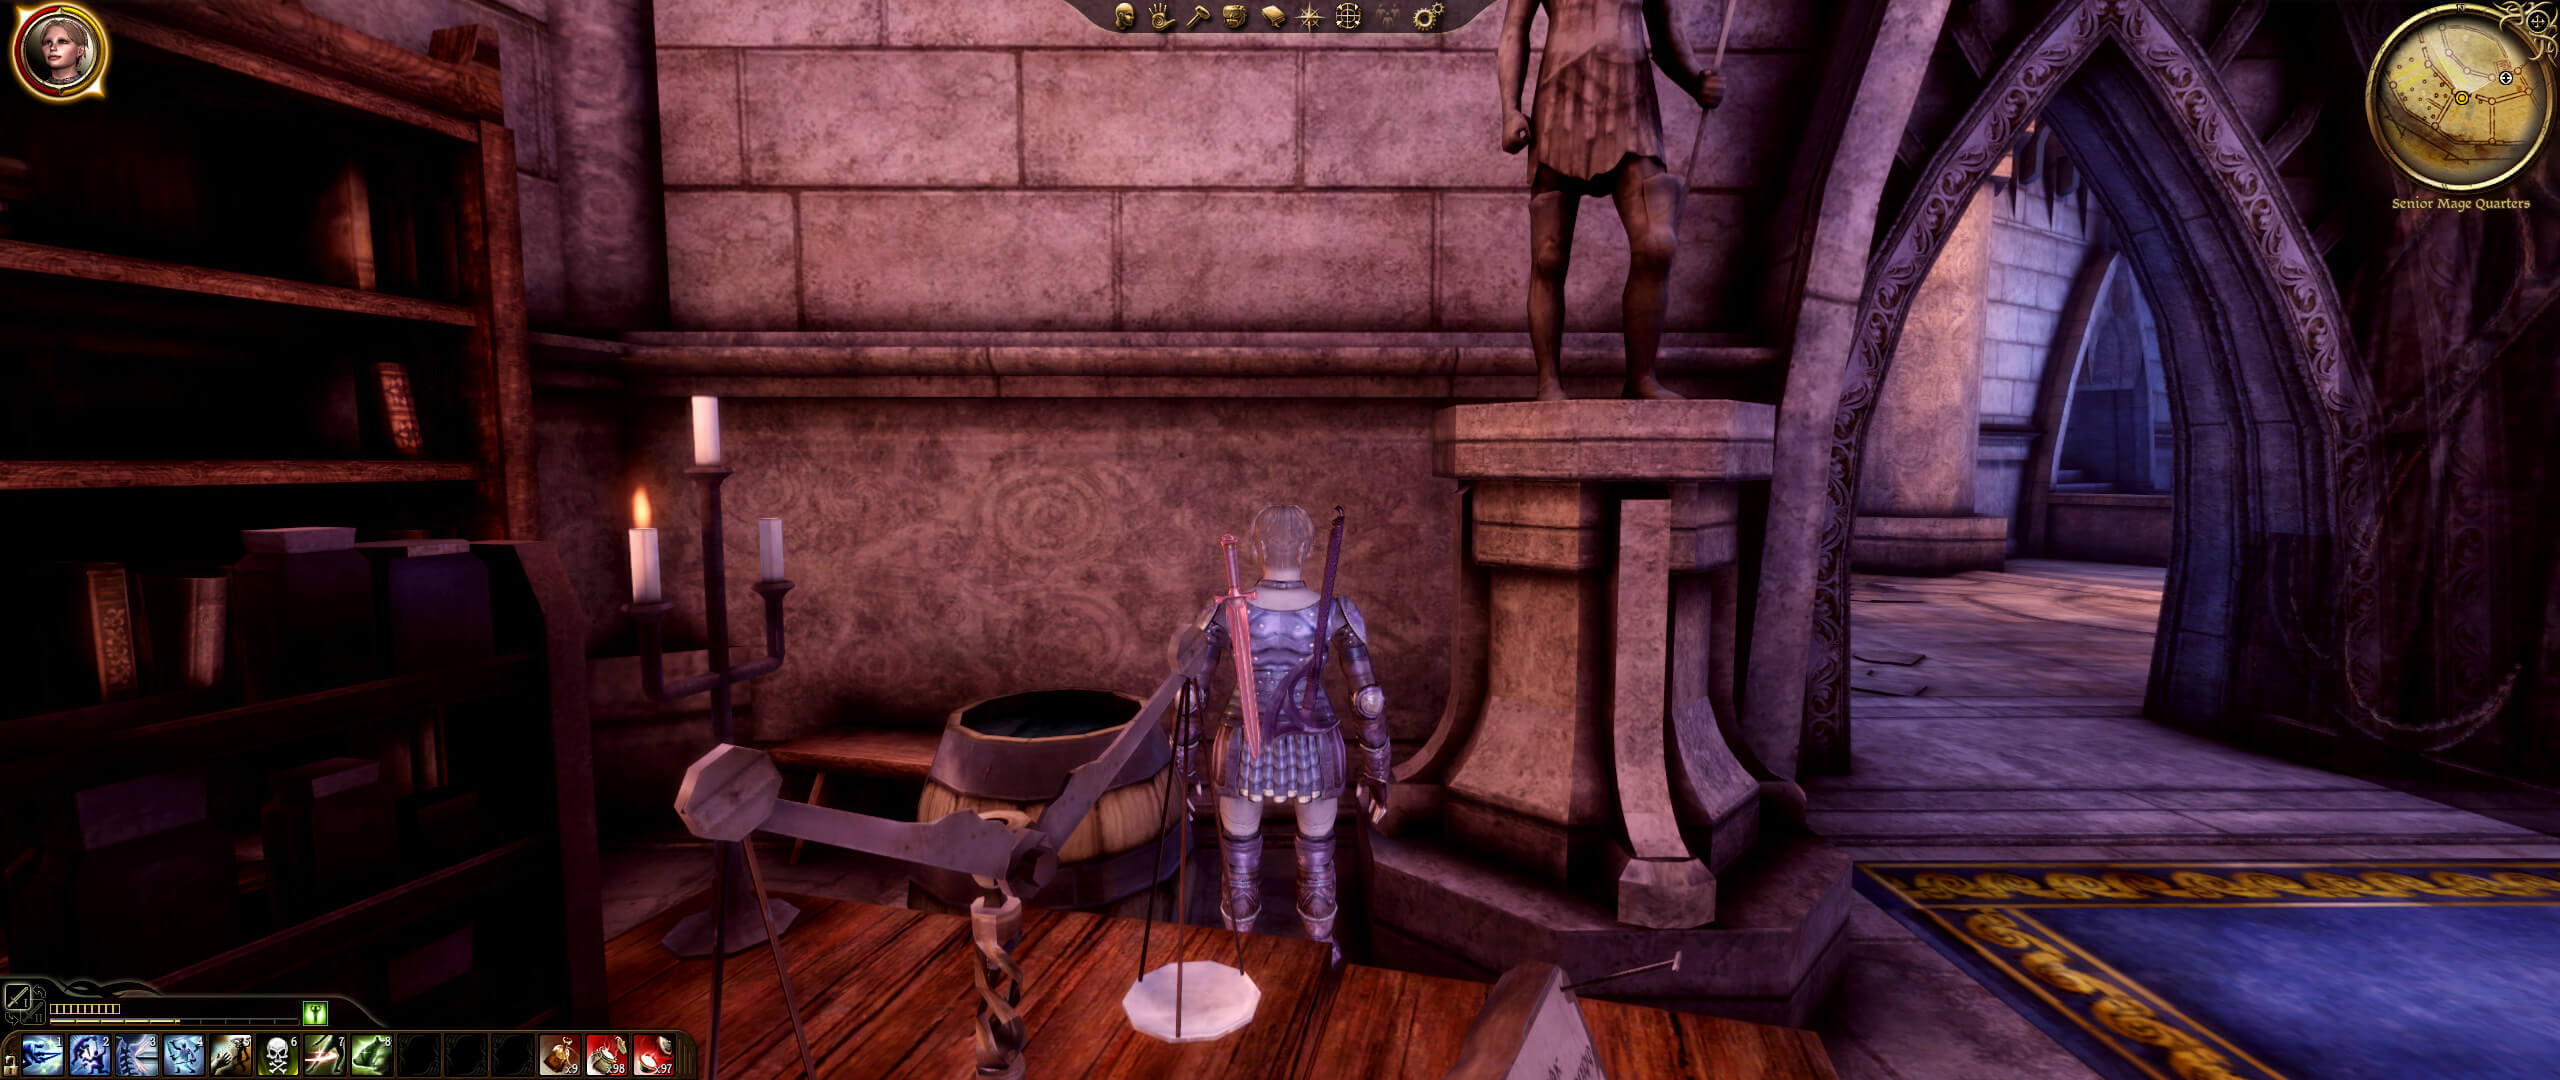 Dragon Age Origins Remaster Mod Upgrades Game's Textures While Retaining  Original Style and Feel